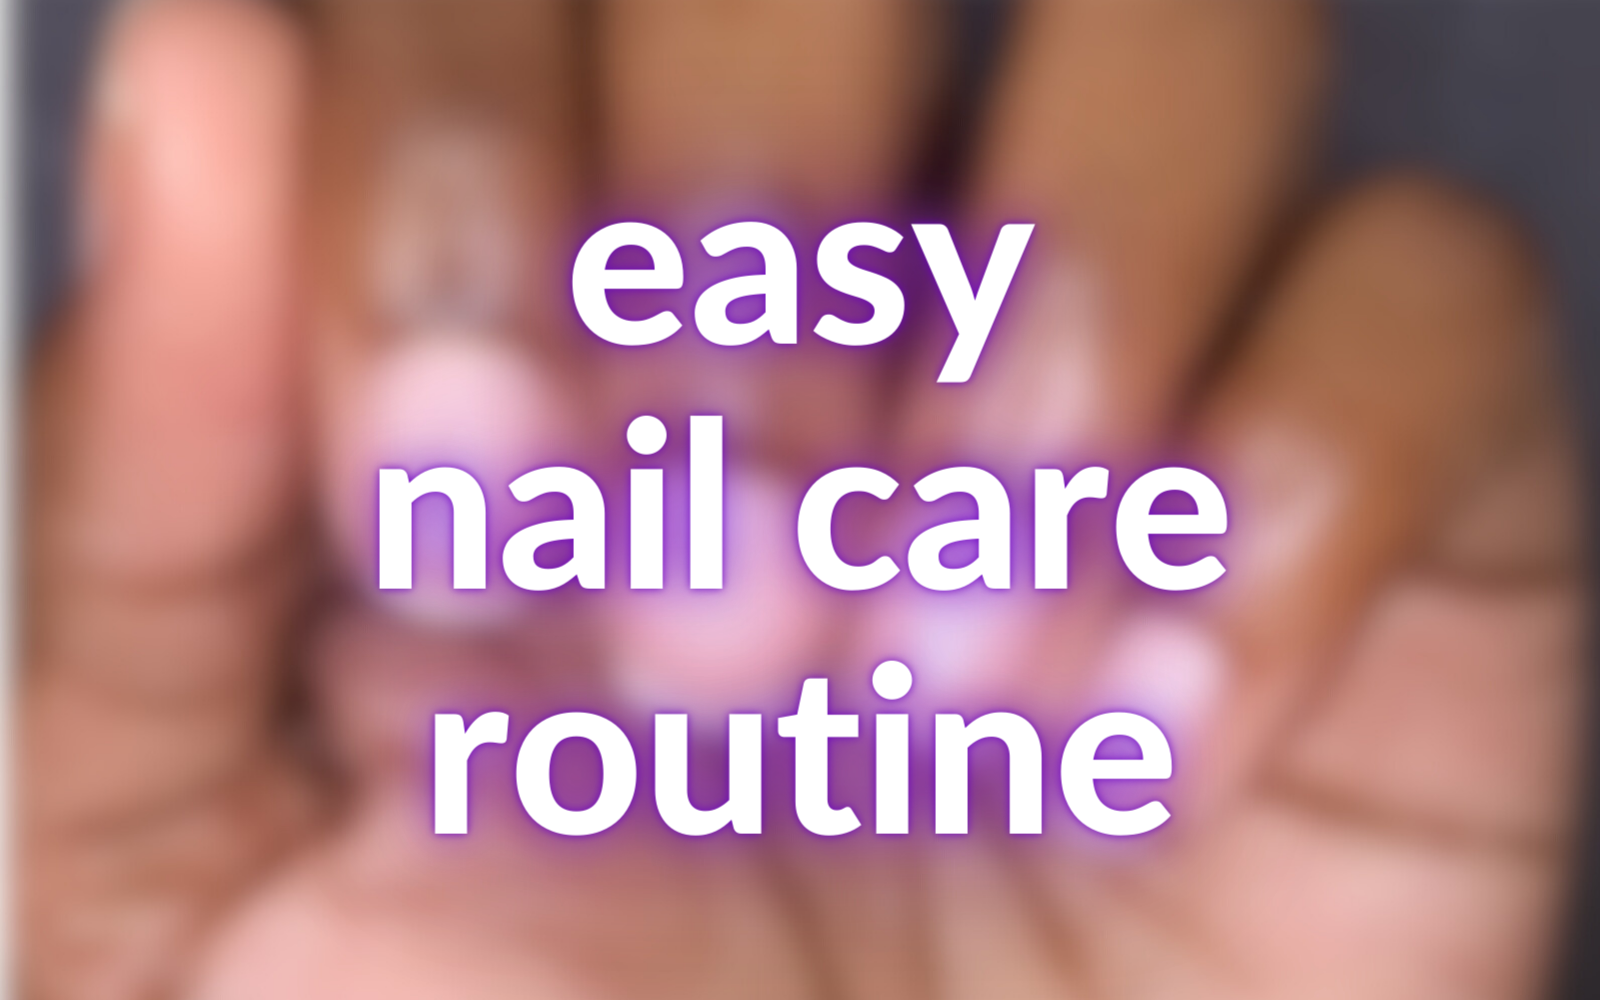 1. How to Create a Simple Nail Tip Design Step by Step - wide 6